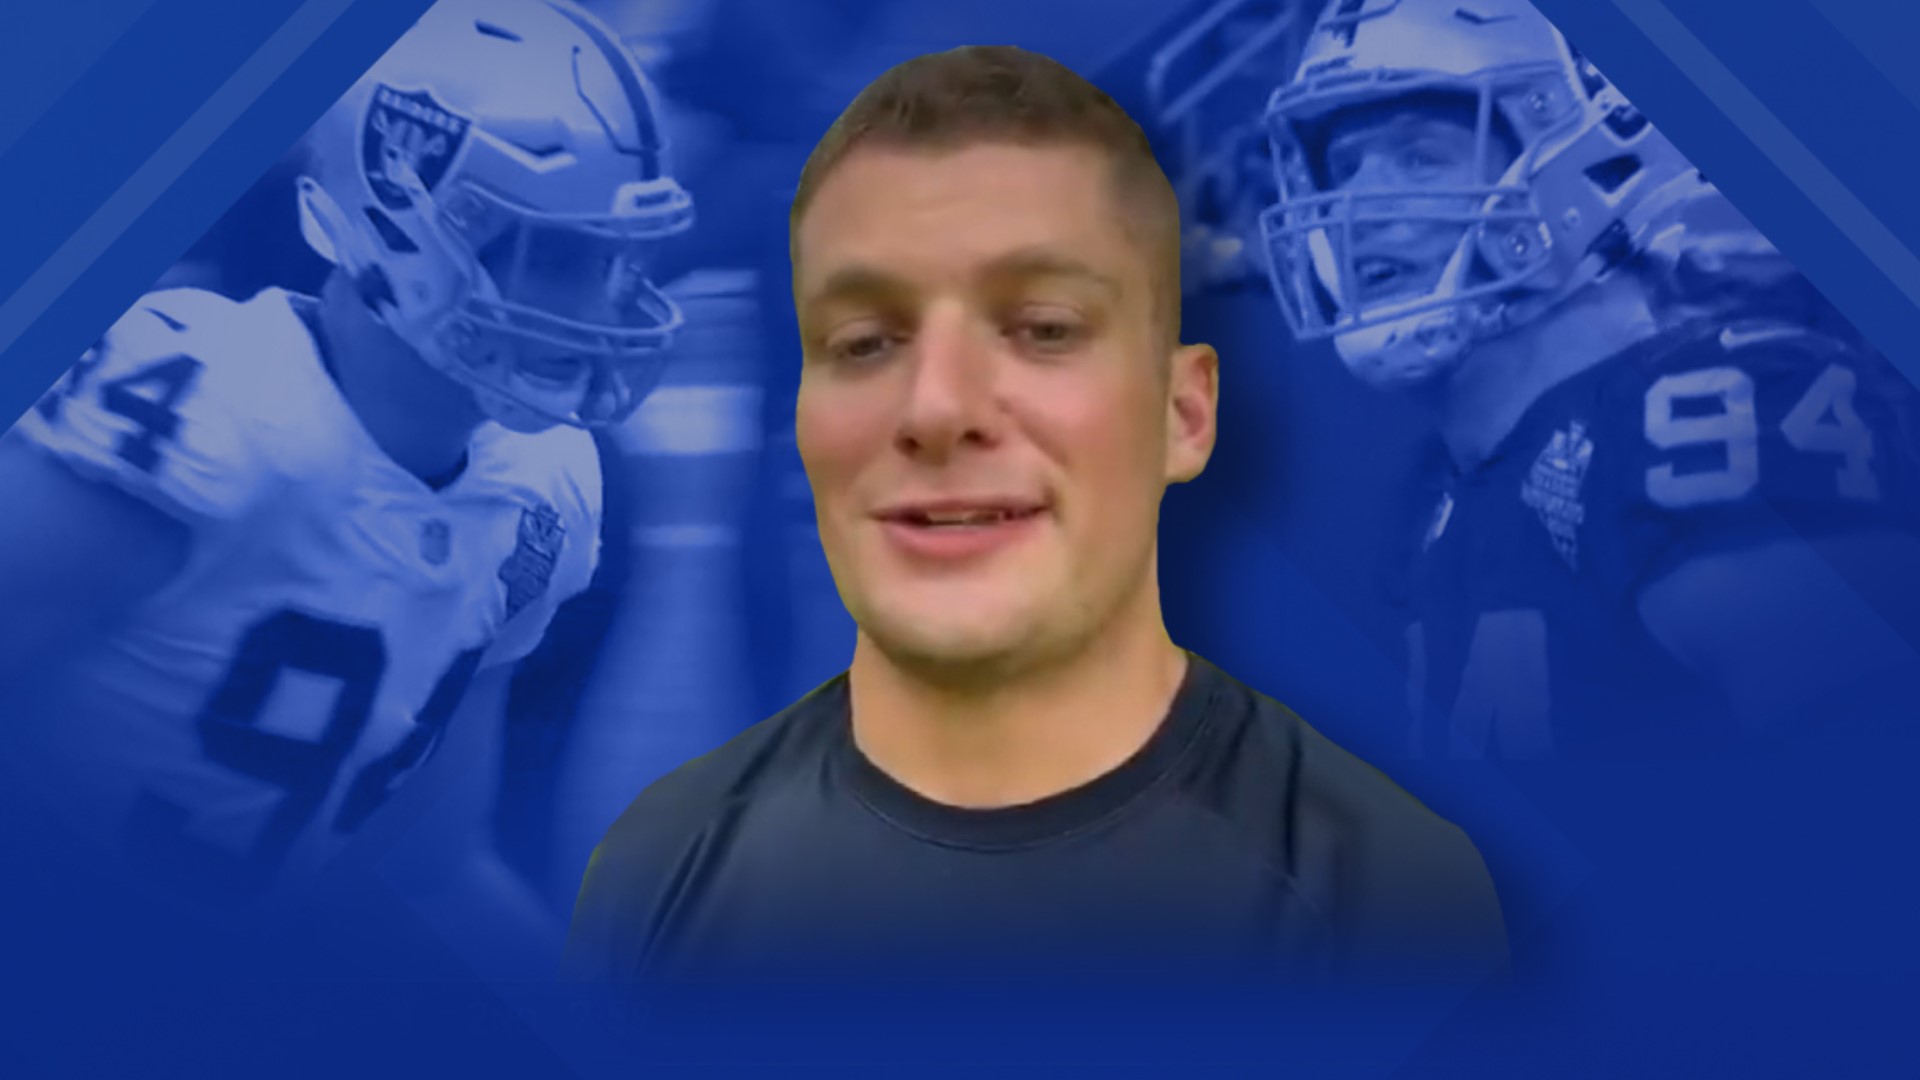 Carl Nassib: First openly gay active NFL player